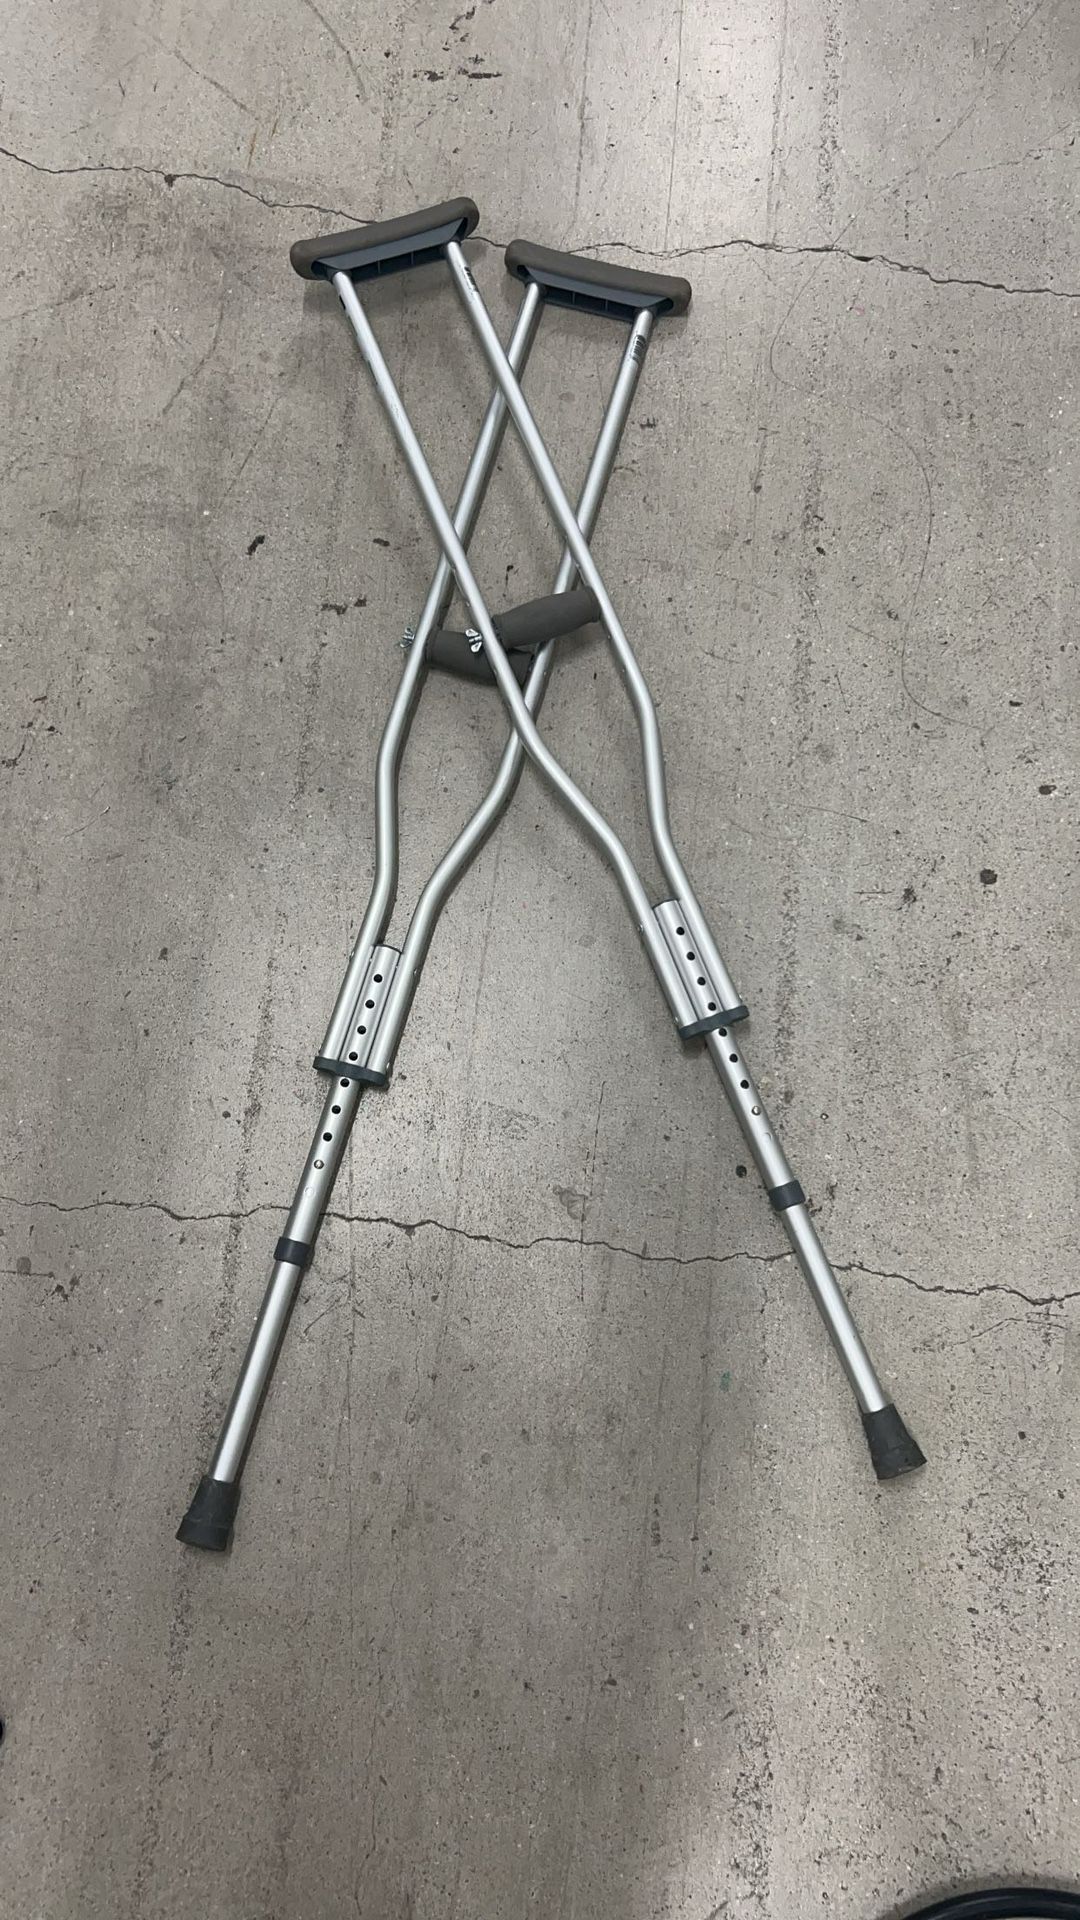 Right Leg Boot And crutches